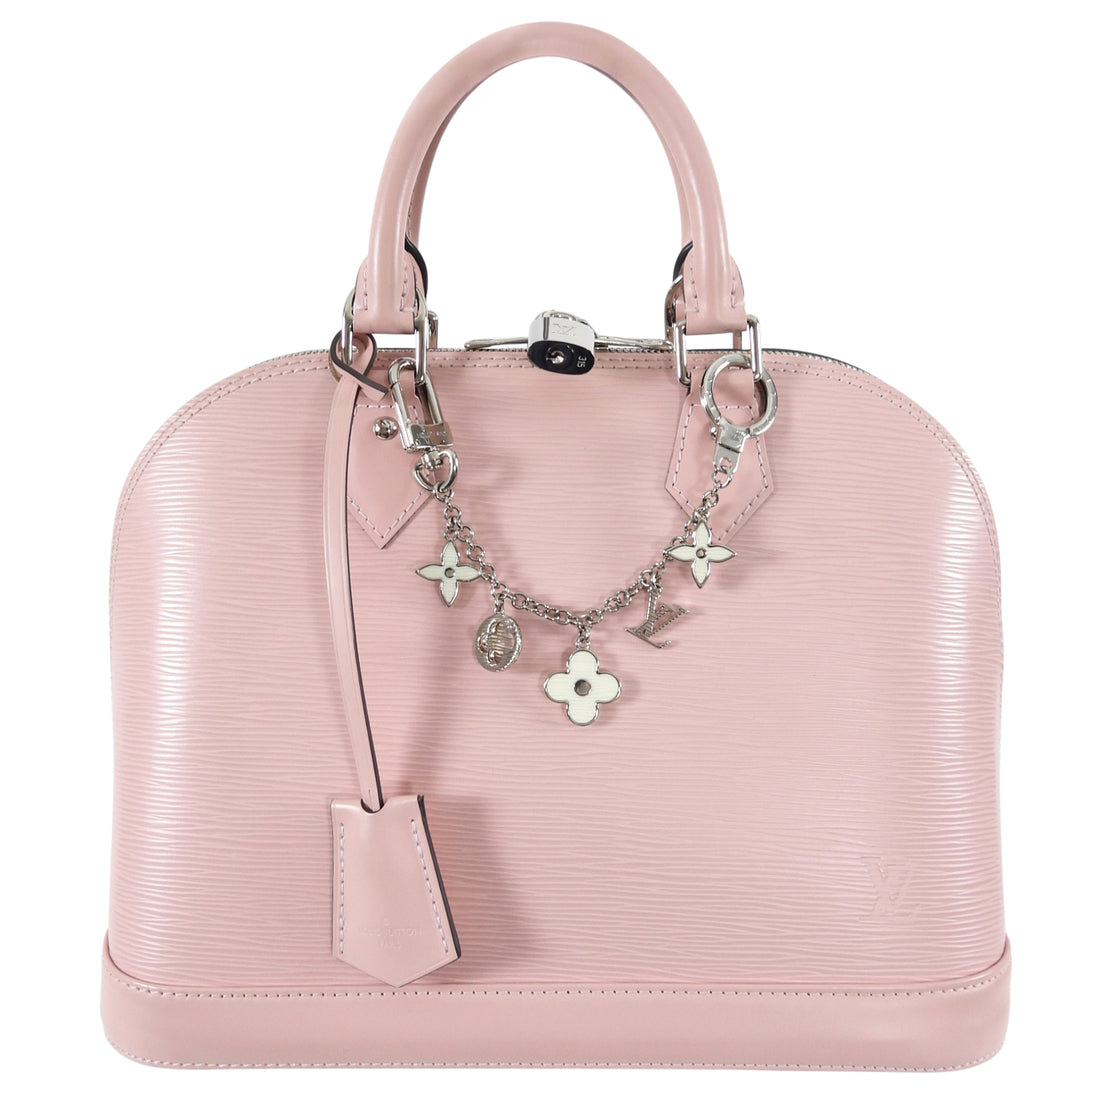 Louis Vuitton Pink Epi Leather Alma PM with Charms – I MISS YOU